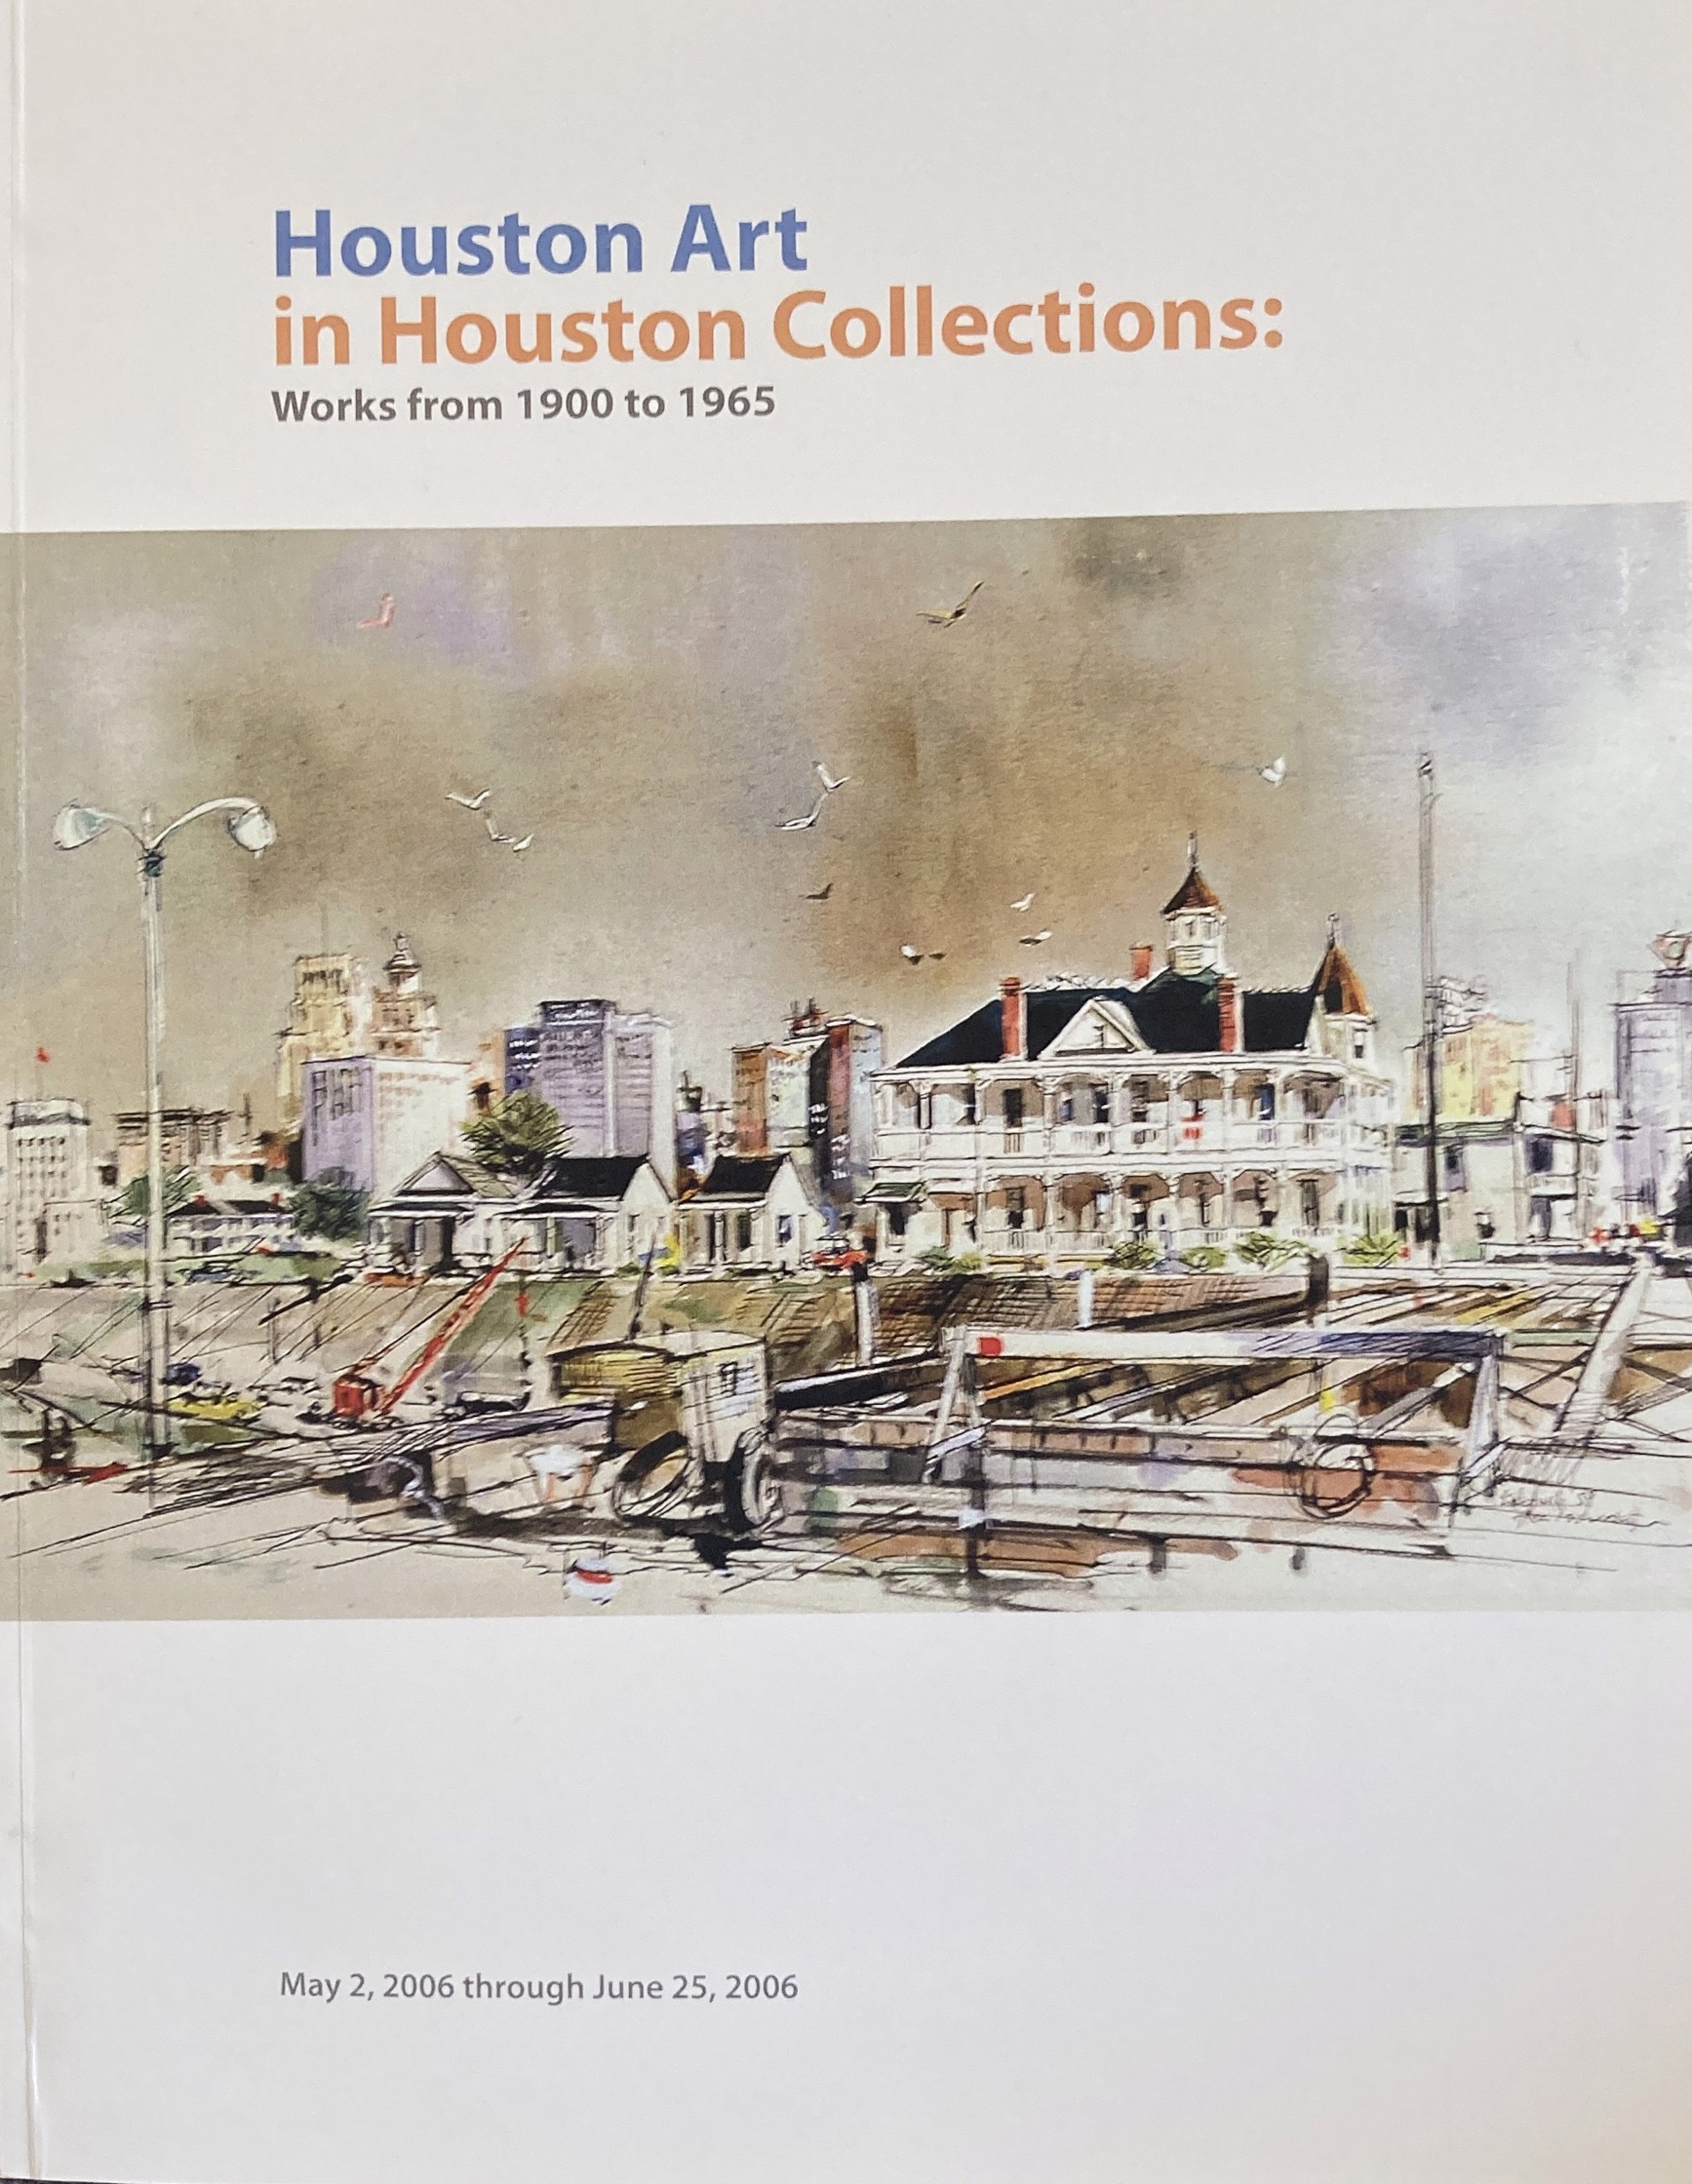 Houston Art in Houston Collections: Works from 1900 to 1965 by Publications